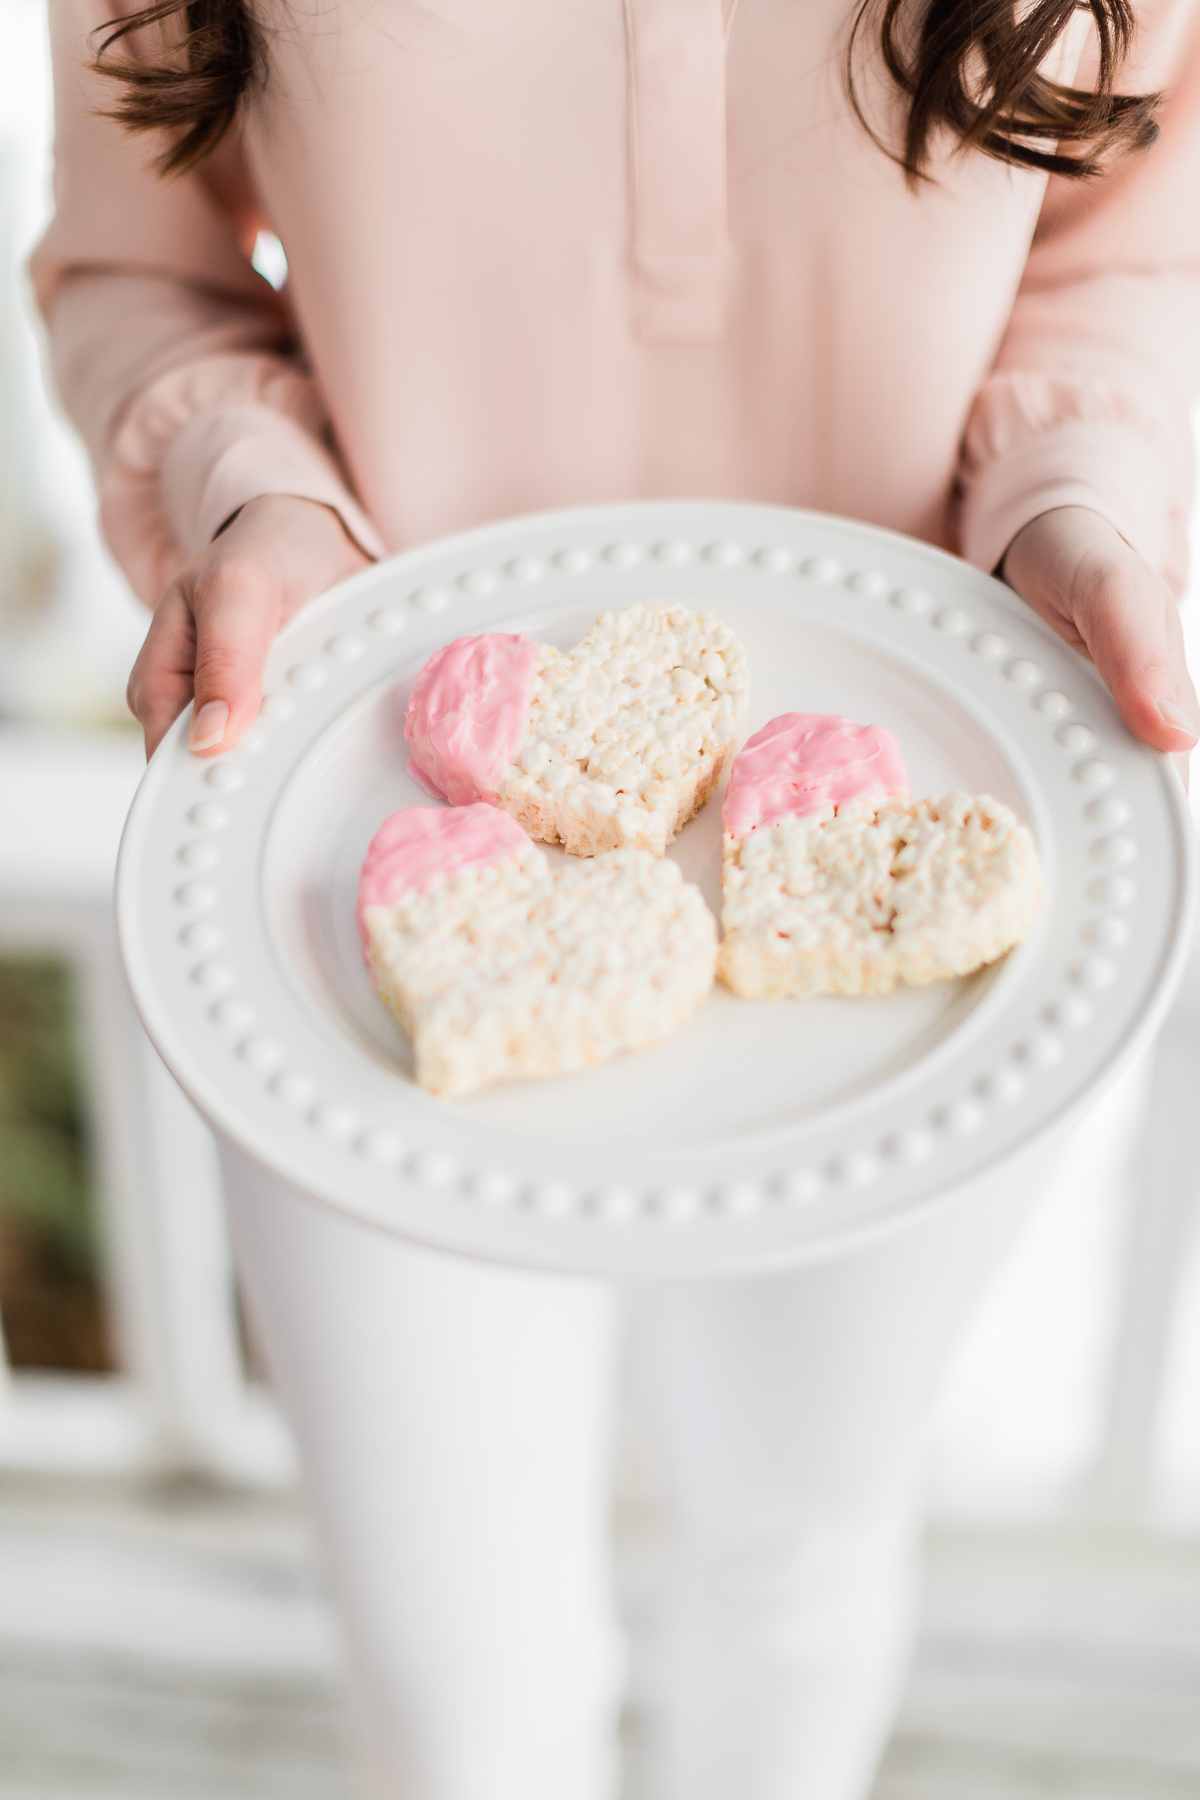 Southern lifestyle blogger Stephanie Ziajka of Diary of a Debutante shares an easy chocolate dipped rice krispie treats recipe for Valentine's Day